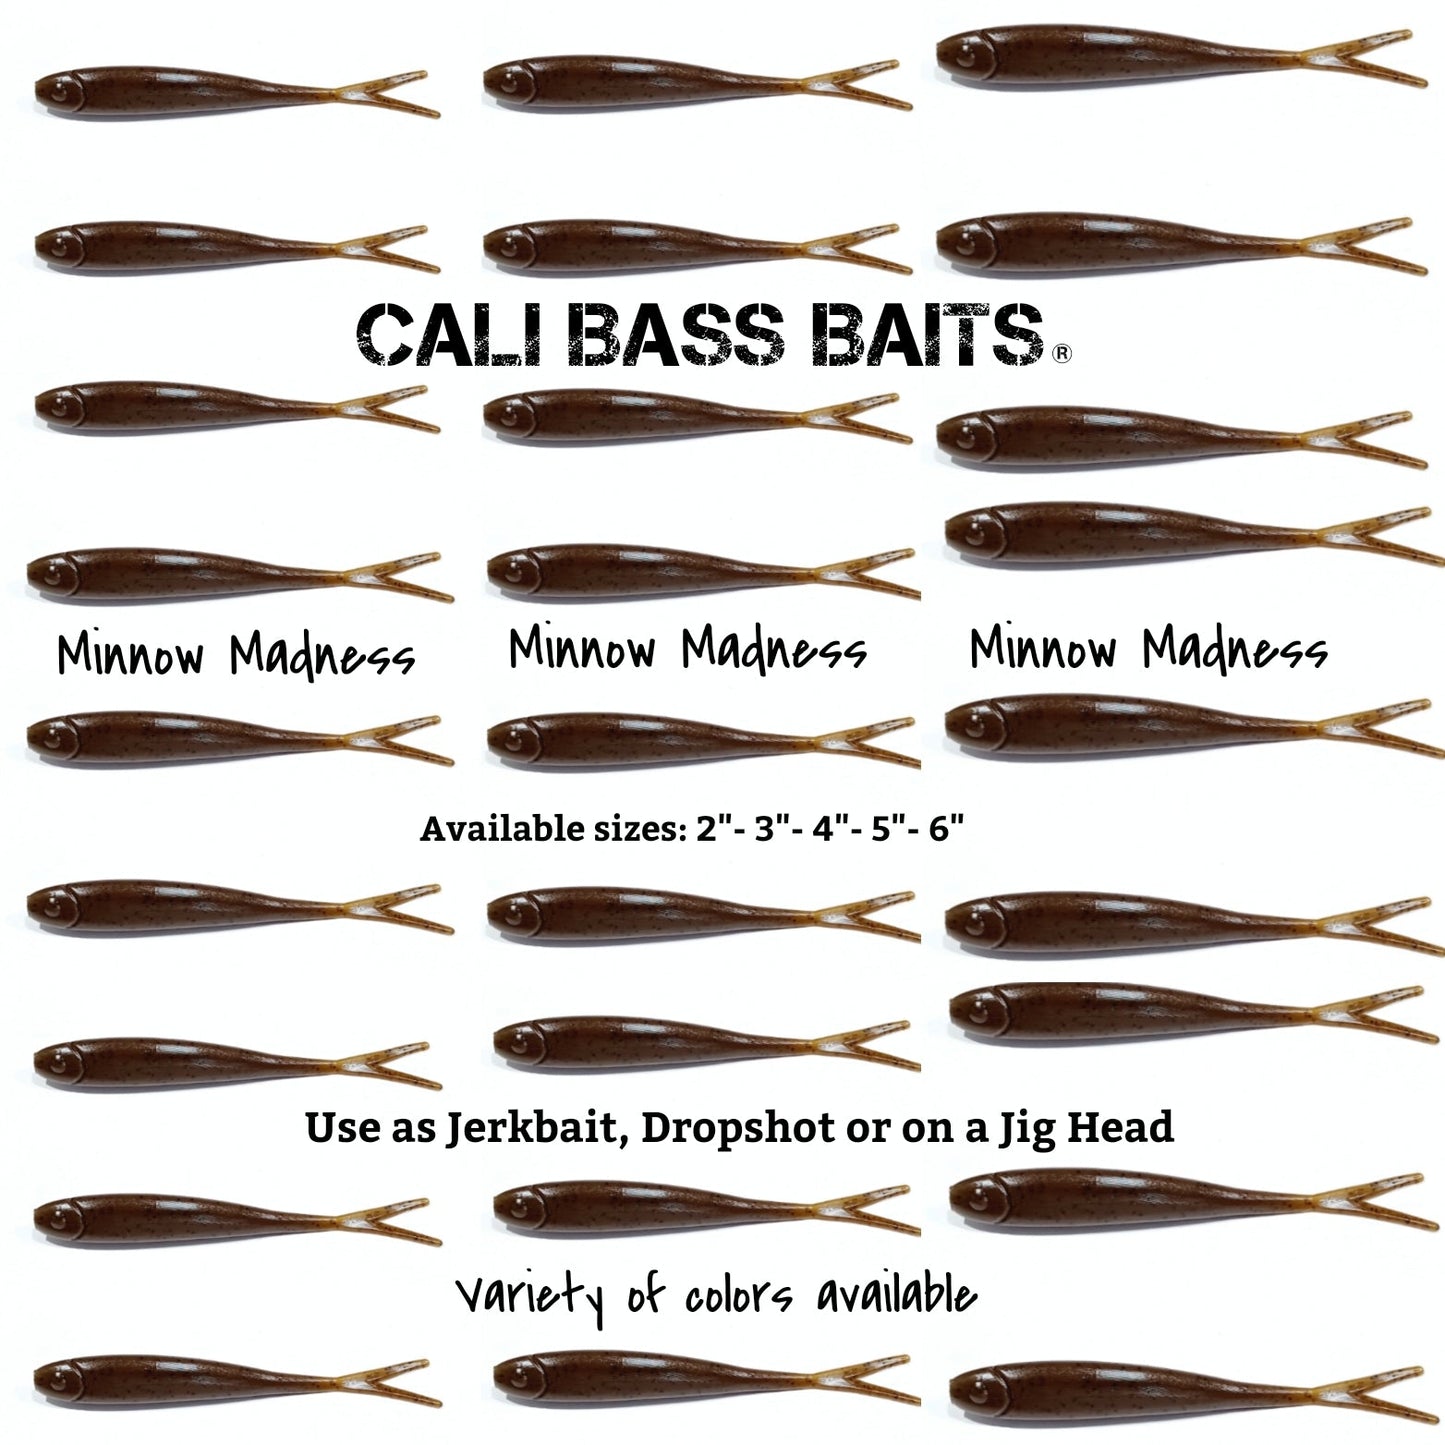 *TROUT CRAPPIE BAITS* New! Minnow Madness (SIZE 2" inch) Our Light Line Series Bait